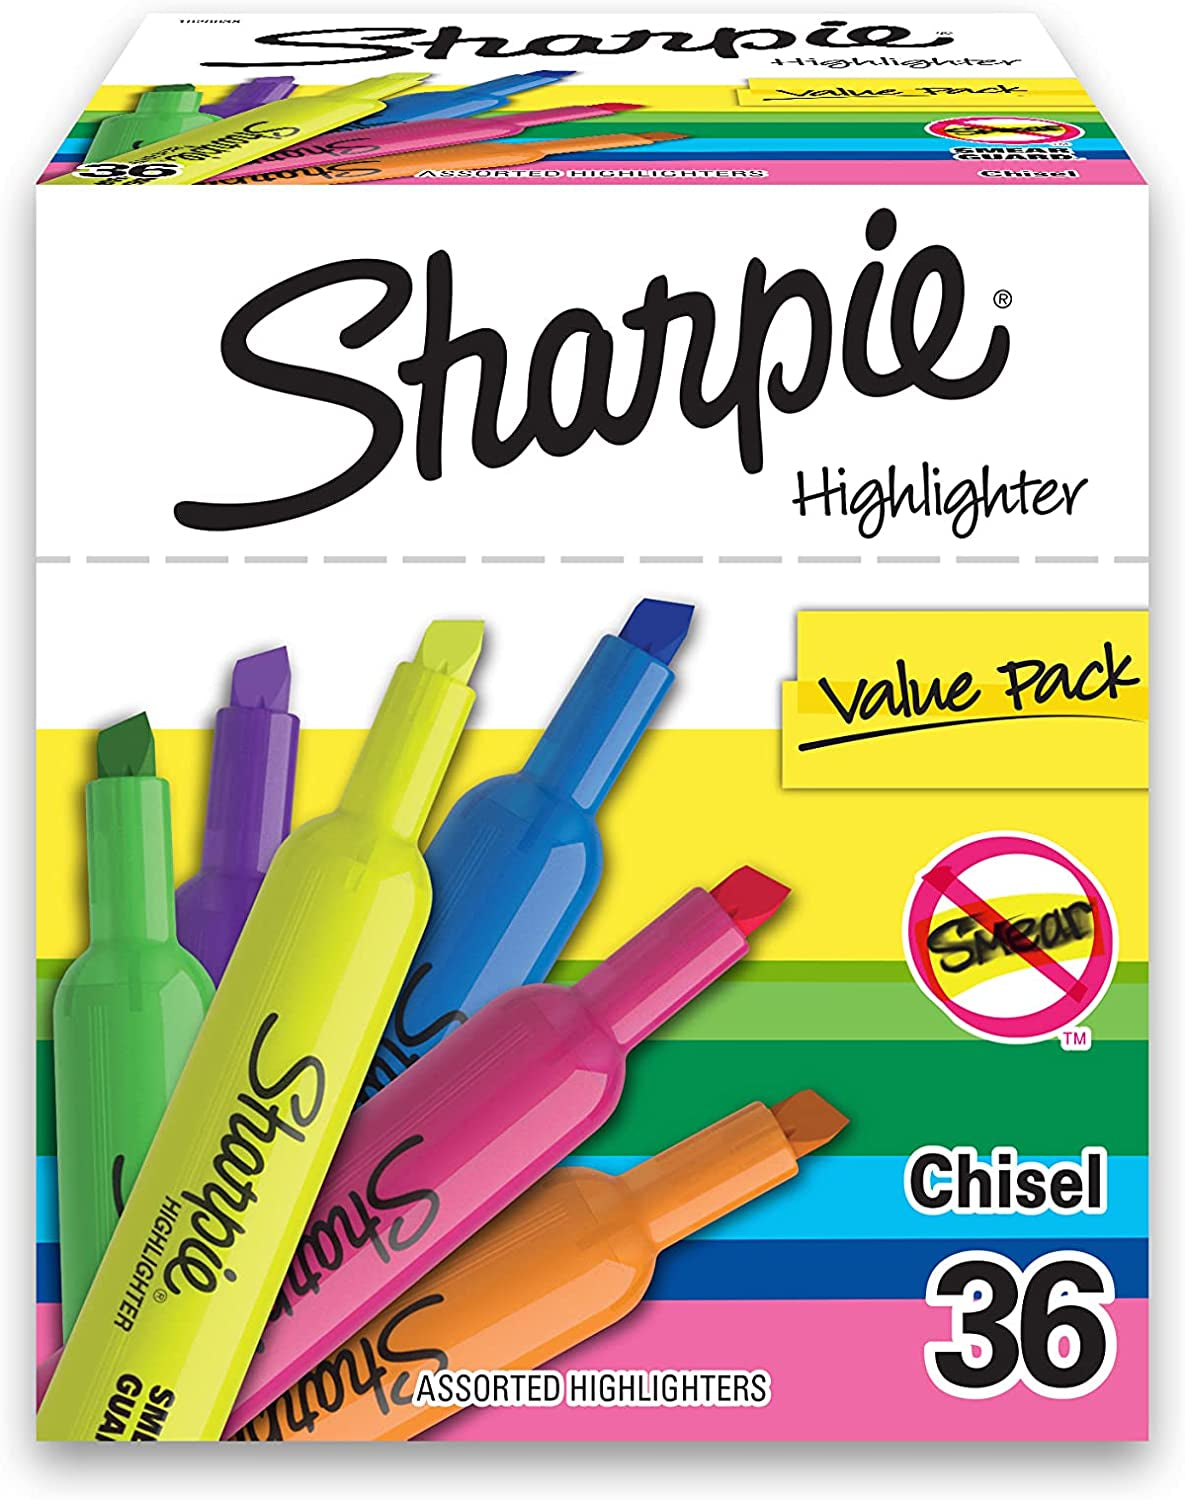 Tank Highlighters, Chisel Tip, Assorted Color Highlighters, Value Pack, 36 Count